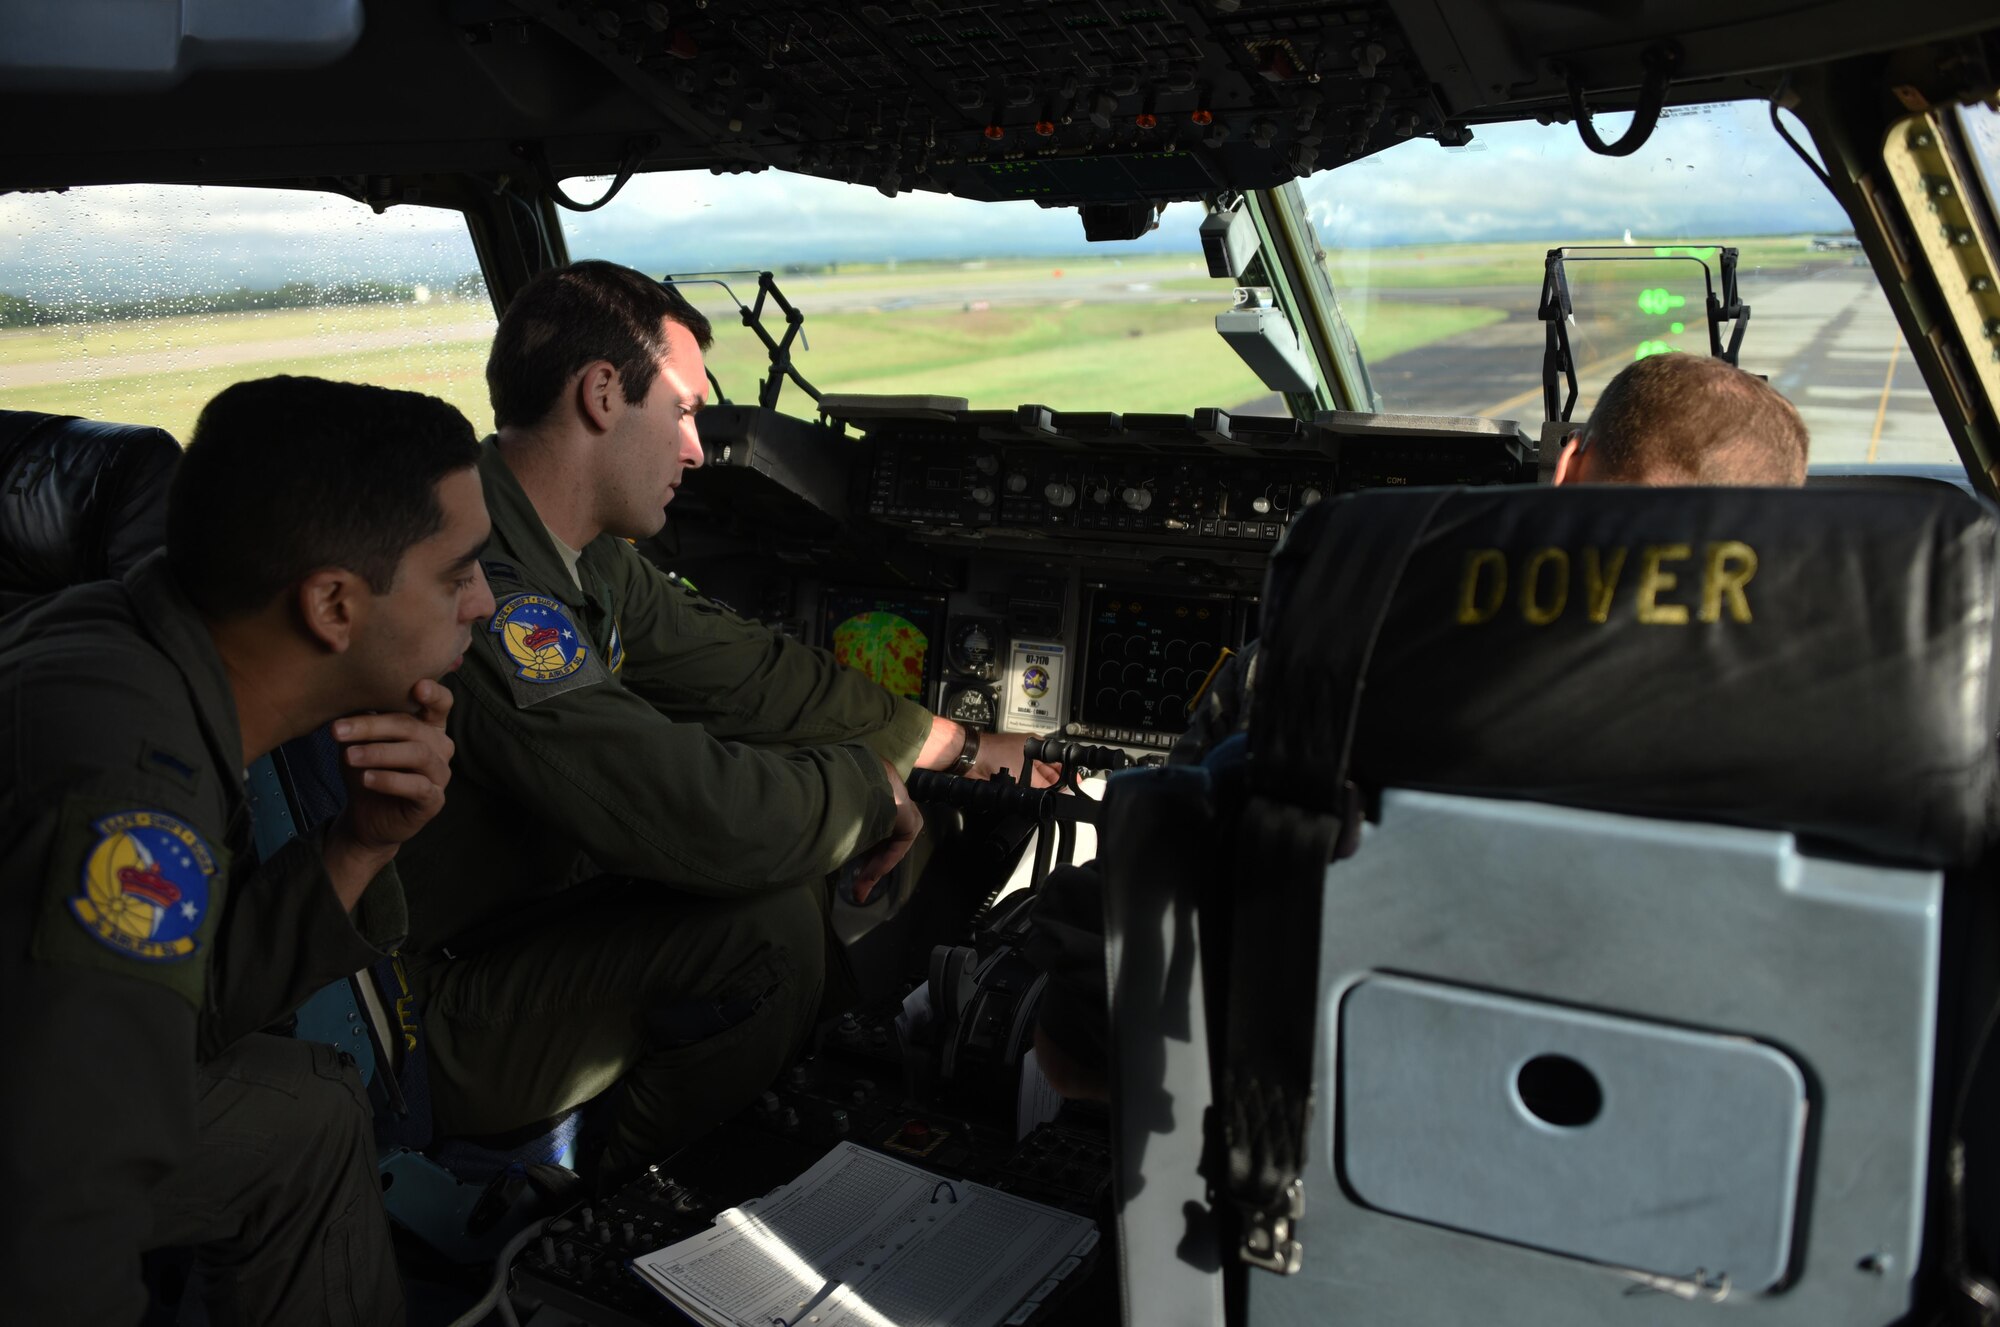 U.S. Air Force 1st Lt. Ben Bertelson, observes as U.S. Air Force Capt. Mike Kieffabar, both 3rd Airlift Squadron pilots, reviews the final mission plan for their flight to Port-au-Prince, Haiti from Soto Cano Air Base, Honduras, Oct. 8, 2016. The aircraft and crew from Dover Air Force Base, Delaware, deployed to Soto Cano within hours of being requested by U.S. Southern Command to transport additional personnel and equipment necessary to sustain flight and maintenance operations for to support Joint Task Force Matthew hurricane relief operations where approximately 200 Soldiers, Airmen and Marines from Special Purpose Marine Air-Ground Task Force-Southern Command and Joint Task Force-Bravo deployed this week with two CH-53E Super Stallion, three CH-47 Chinook, and two UH-60L and two HH-60L Black Hawk helicopters to provide heavy and medium lift to support the U.S. Agency for International Development-led mission. (U.S. Air Force photo by Capt. David Liapis)